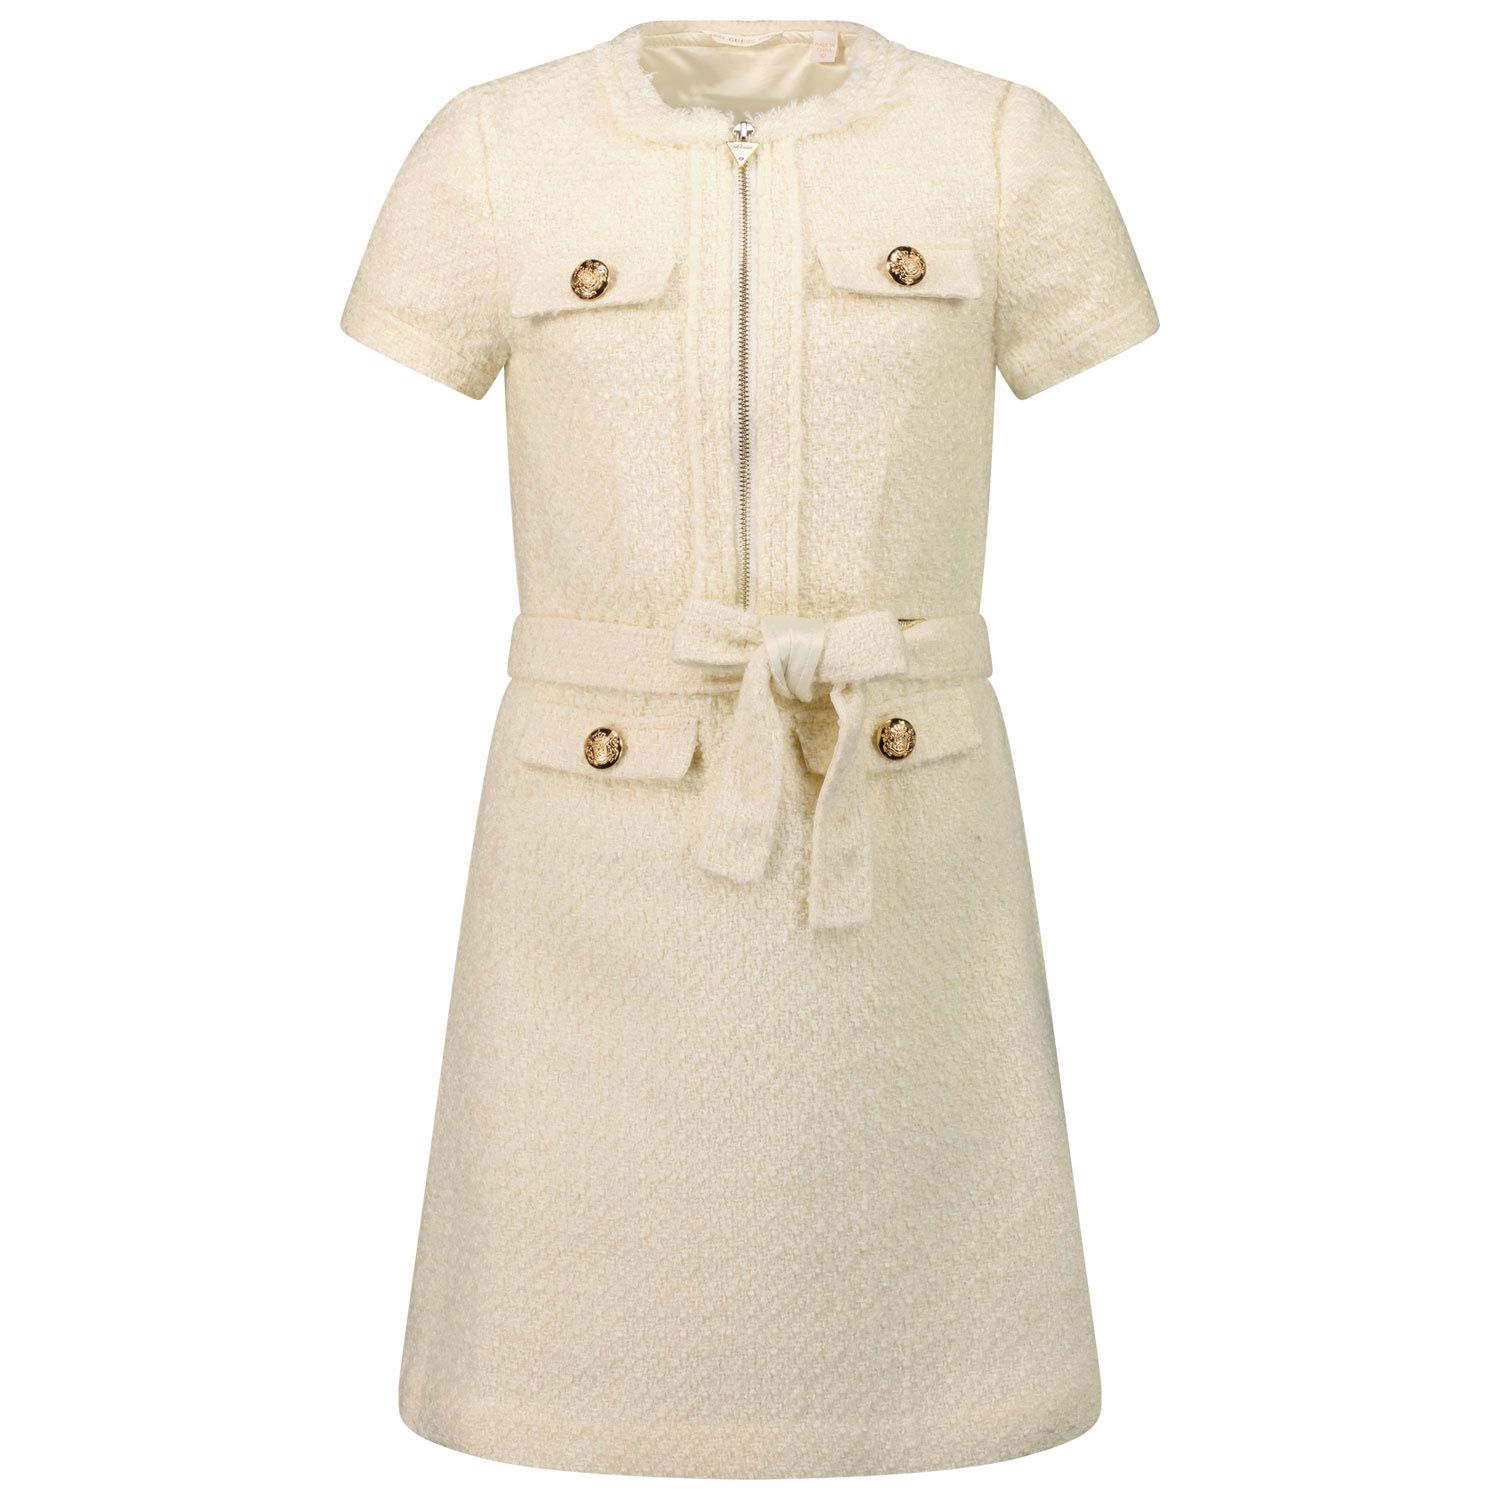 Picture of Guess J1BK59 9608Z kids dress off white